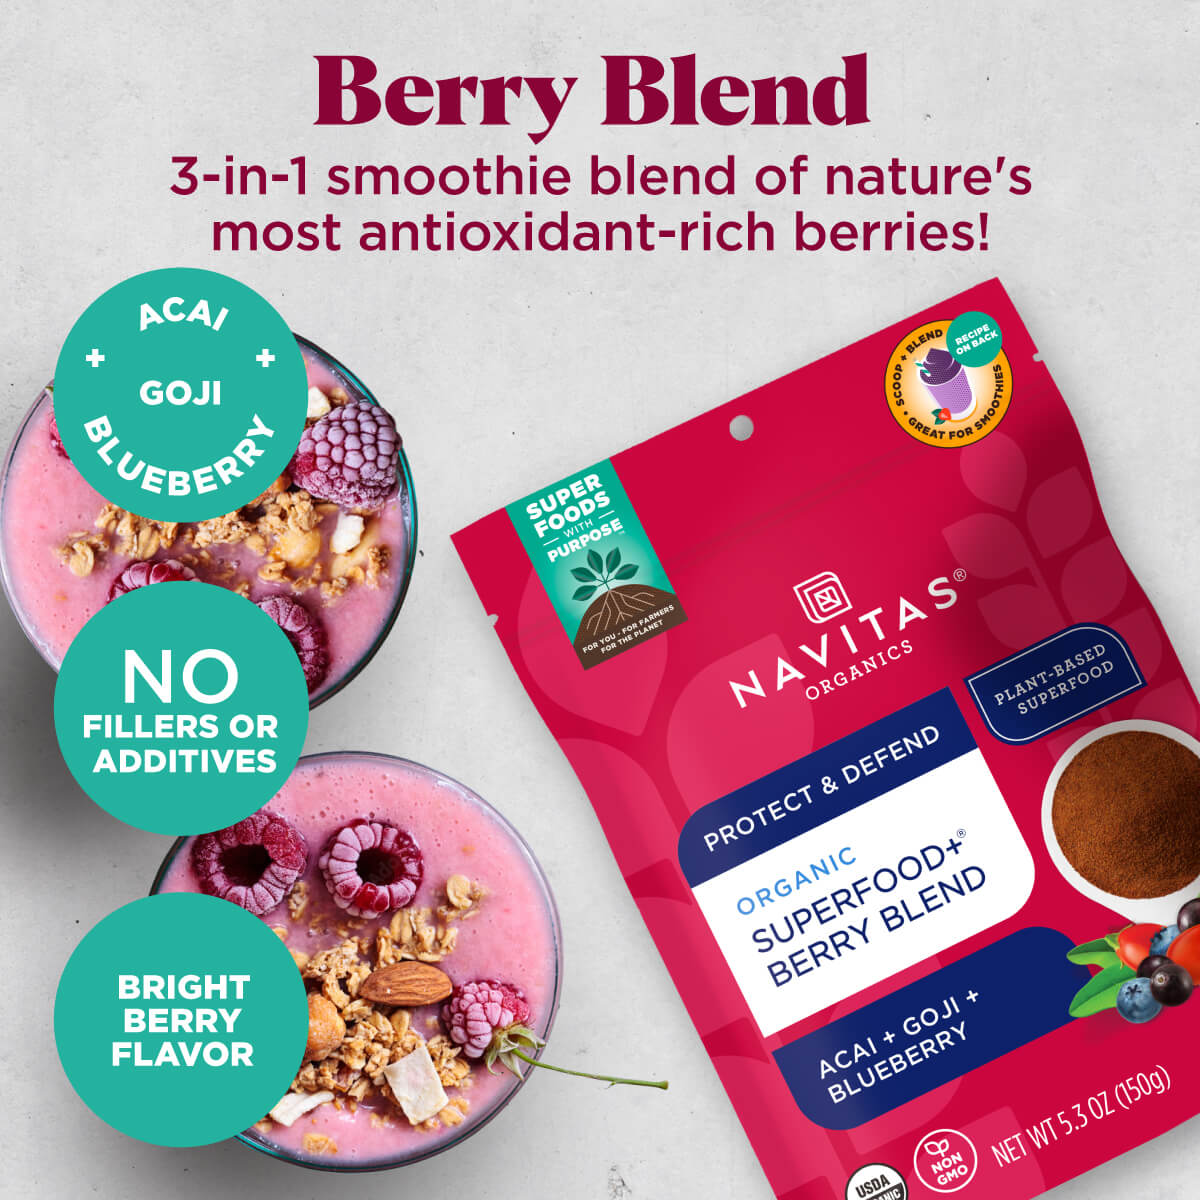 Navitas Organics Superfood+ Berry Blend is a 3-in-1 smoothie blend of nature's most antioxidant-rich berries!